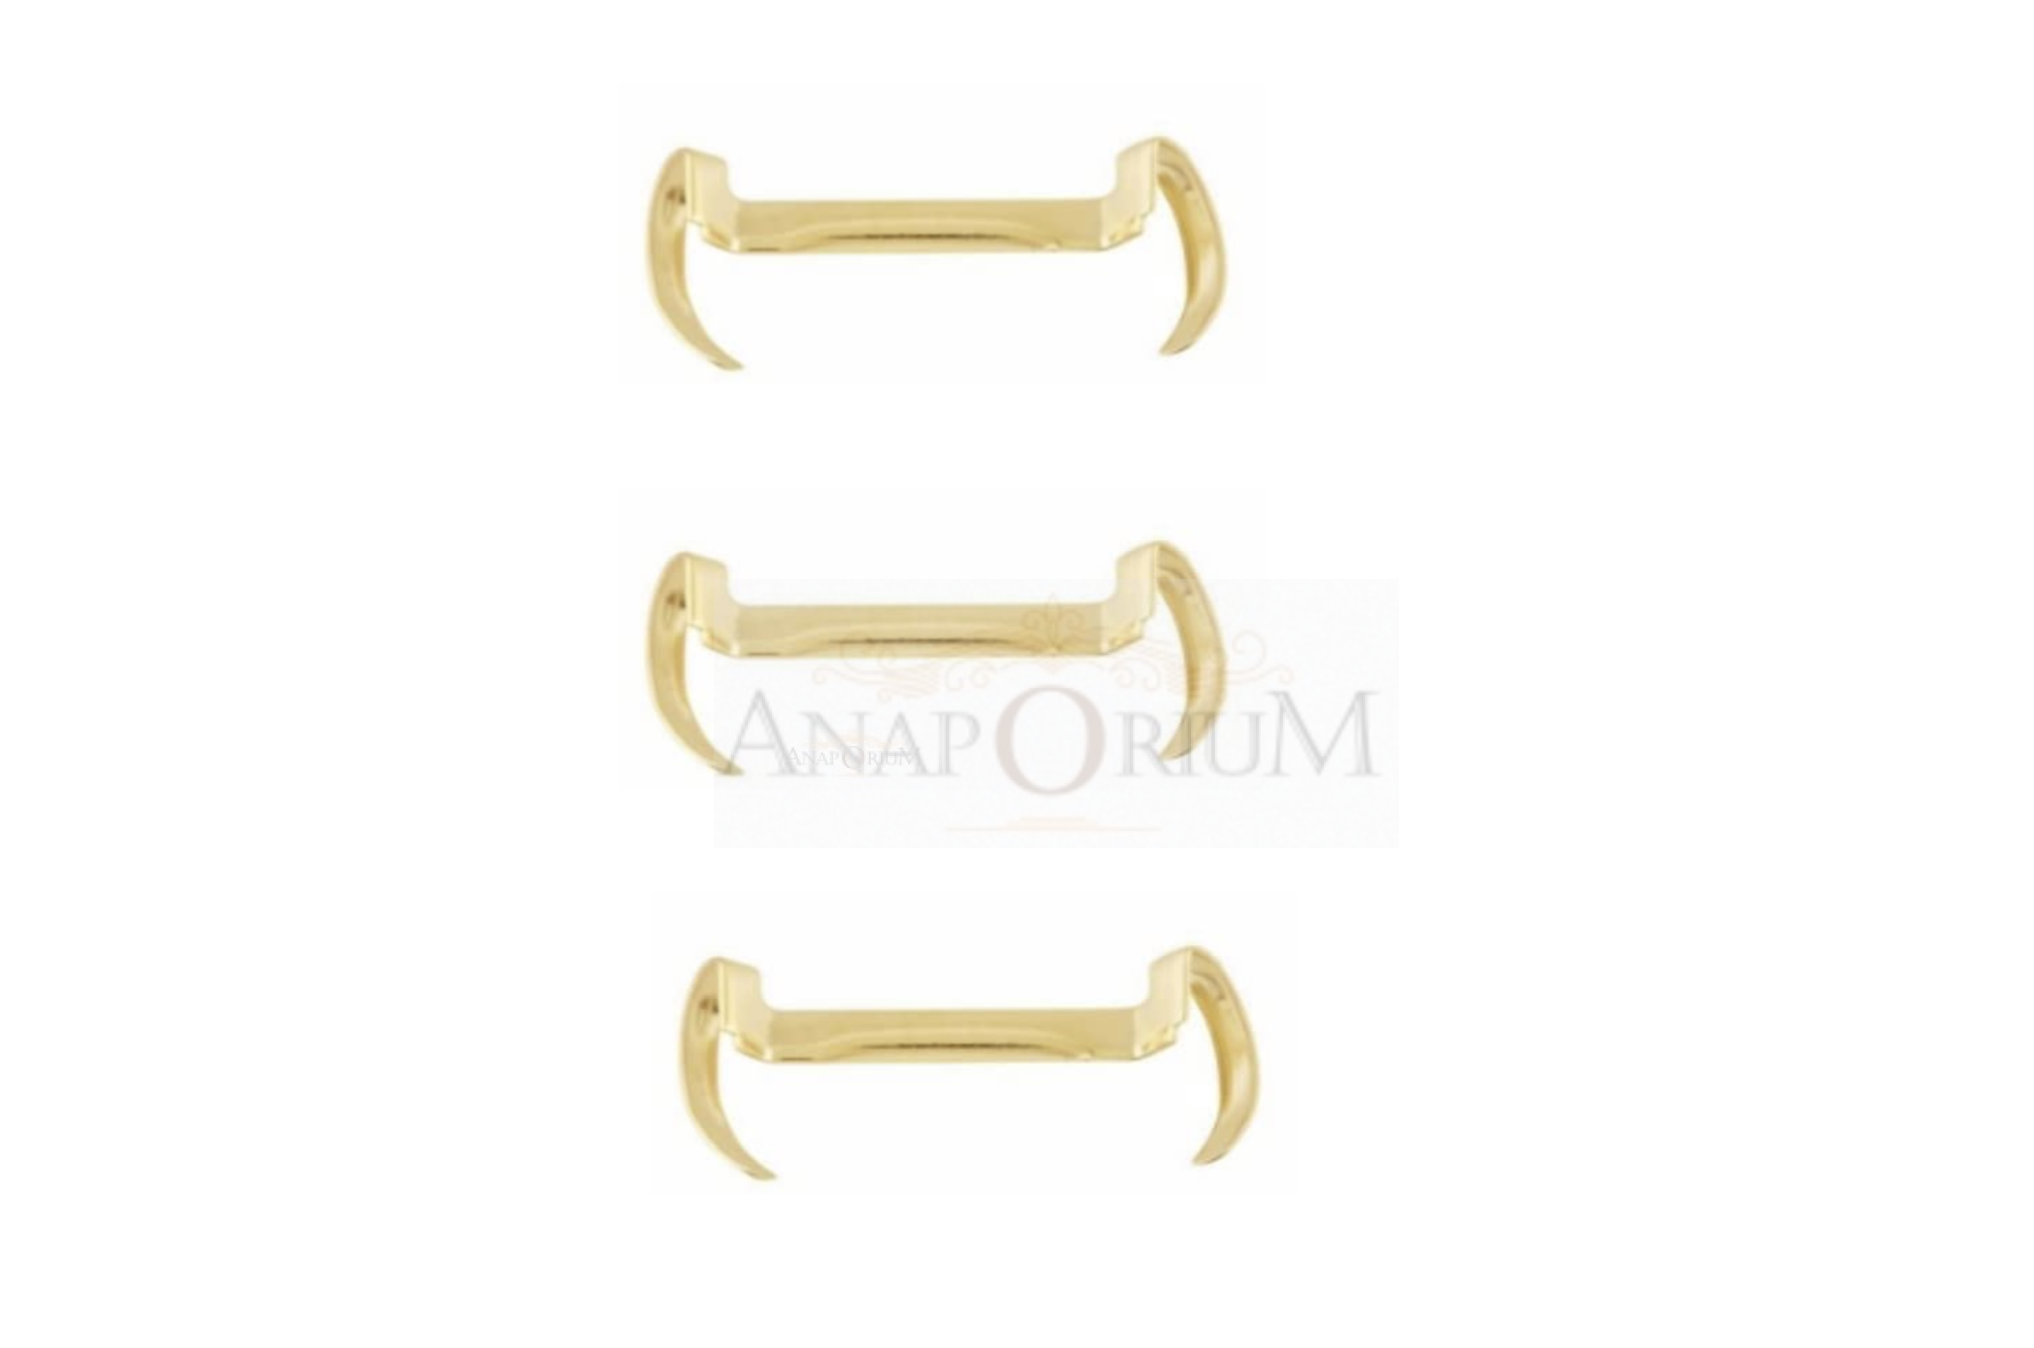 RING GUARD/ADJUSTER/RESIZER - White/Yellow 14kt gold filled.In 3